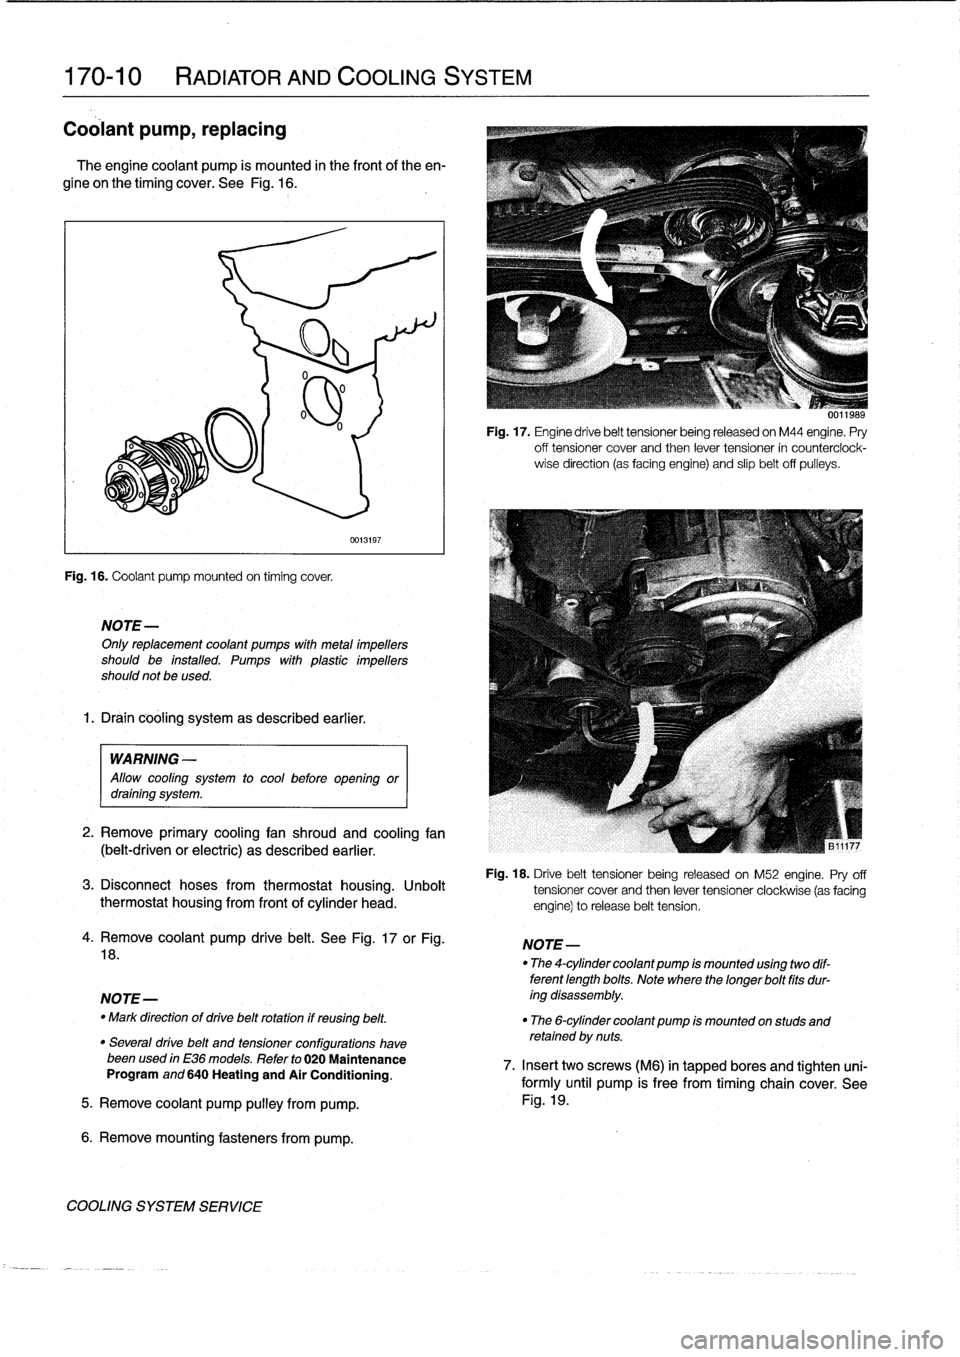 BMW 323i 1997 E36 Workshop Manual 
170-10

	

RADIATOR
AND
COOLING
SYSTEM

Coolant
pump,
replacing

The
engine
coolant
pump
is
mounted
in
the
frontof
the
en-

gine
on
the
timing
cover
.
See
Fig
.
16
.

Fig
.
16
.
Coolant
pump
mounted
